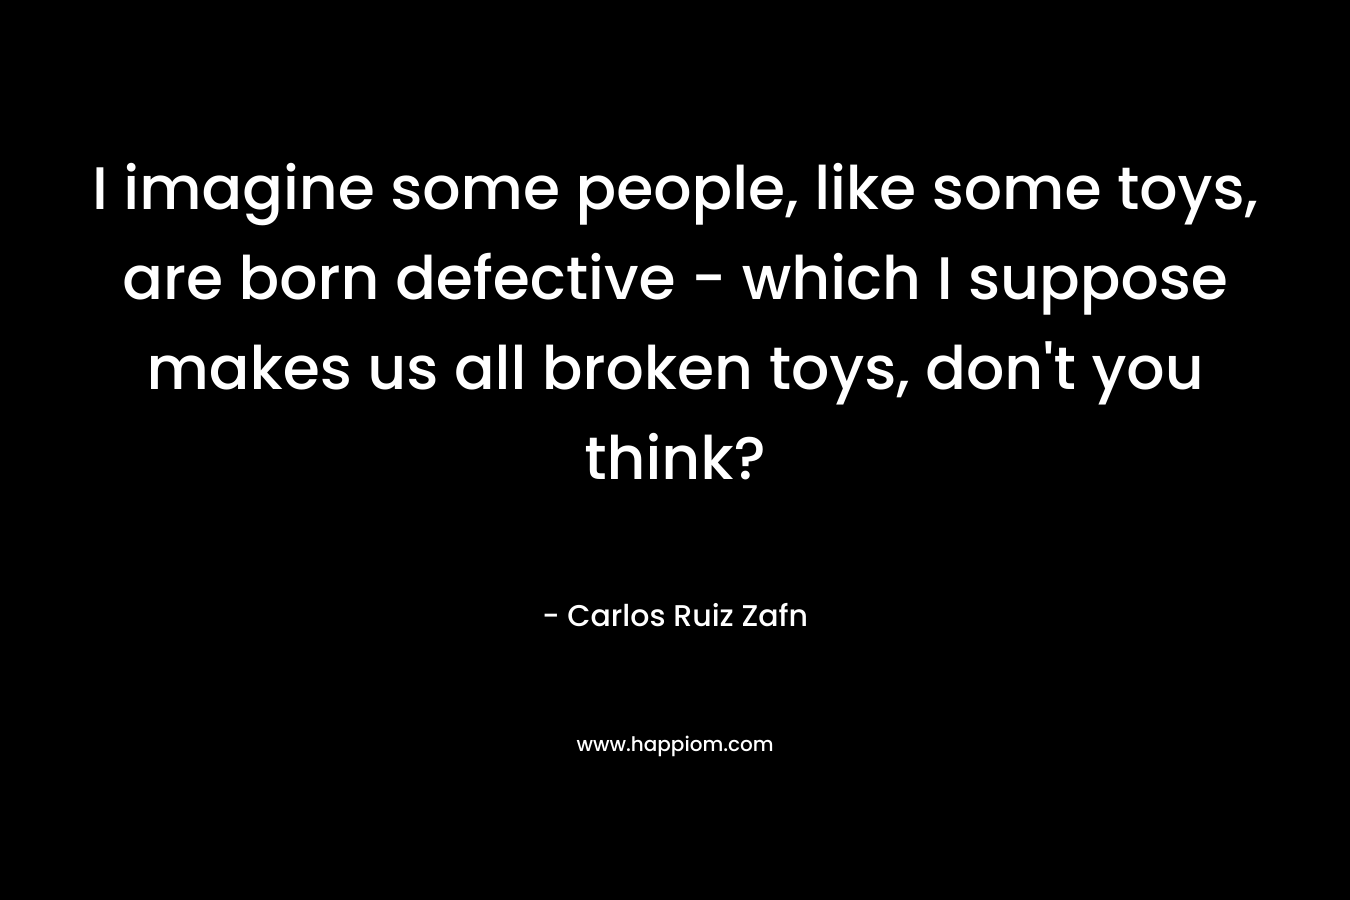 I imagine some people, like some toys, are born defective – which I suppose makes us all broken toys, don’t you think? – Carlos Ruiz Zafn